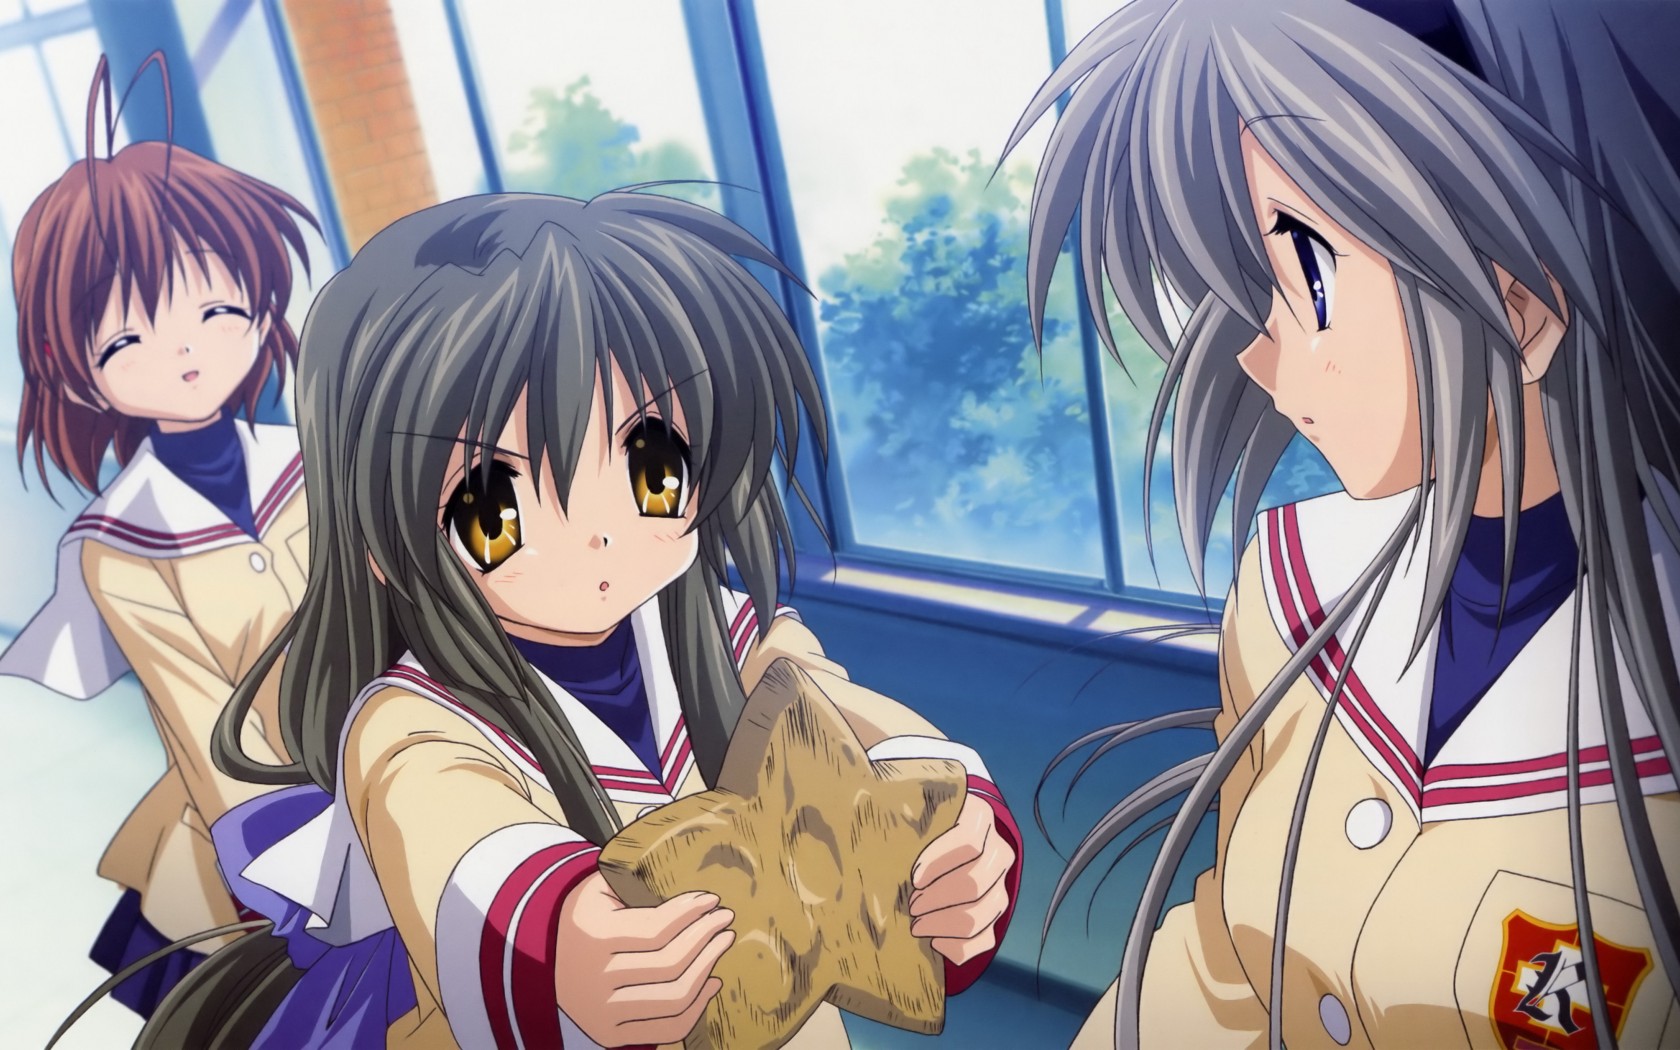 1440x Kazumi Ikeda Clannad Fuko Ibuki 1440x Resolution Wallpaper Hd Anime 4k Wallpapers Images Photos And Background Wallpapers Den